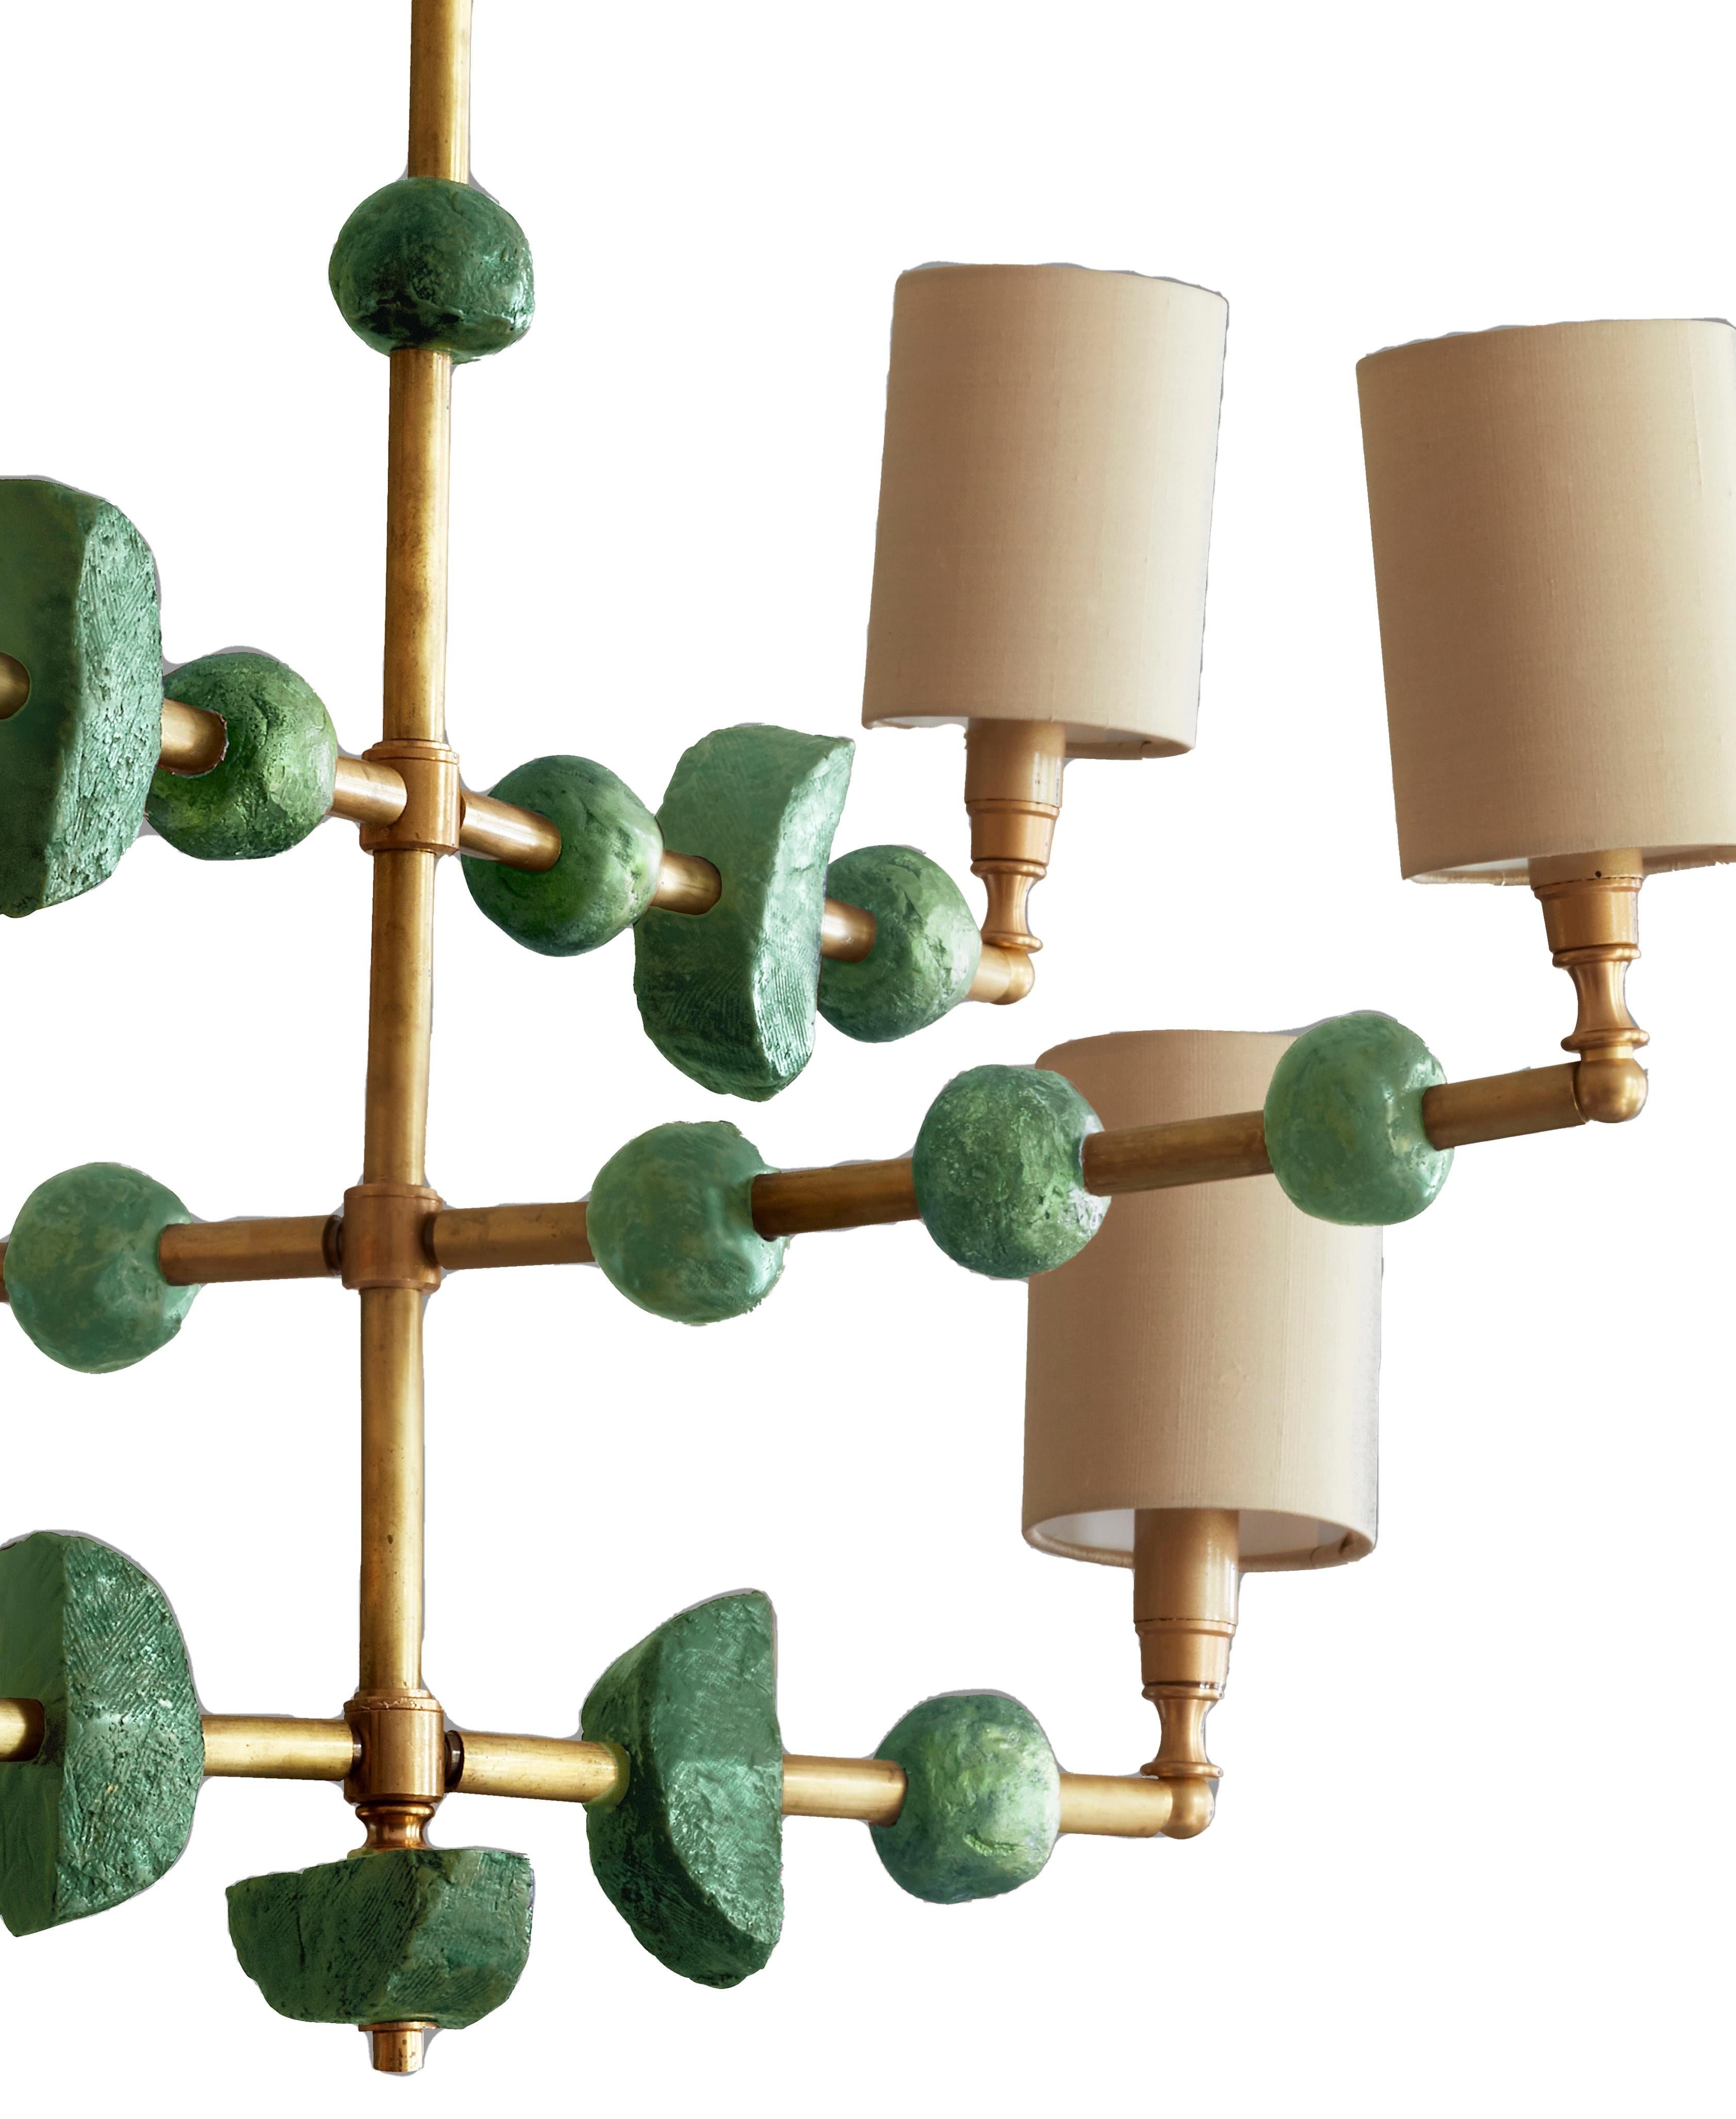 This contemporary three-tier chandelier by Margit Wittig features sculptural components with organic and subtle textures, all cast and treated with multiple layers of patina in her London studio. The contrast of green waxed resin and brass, is the